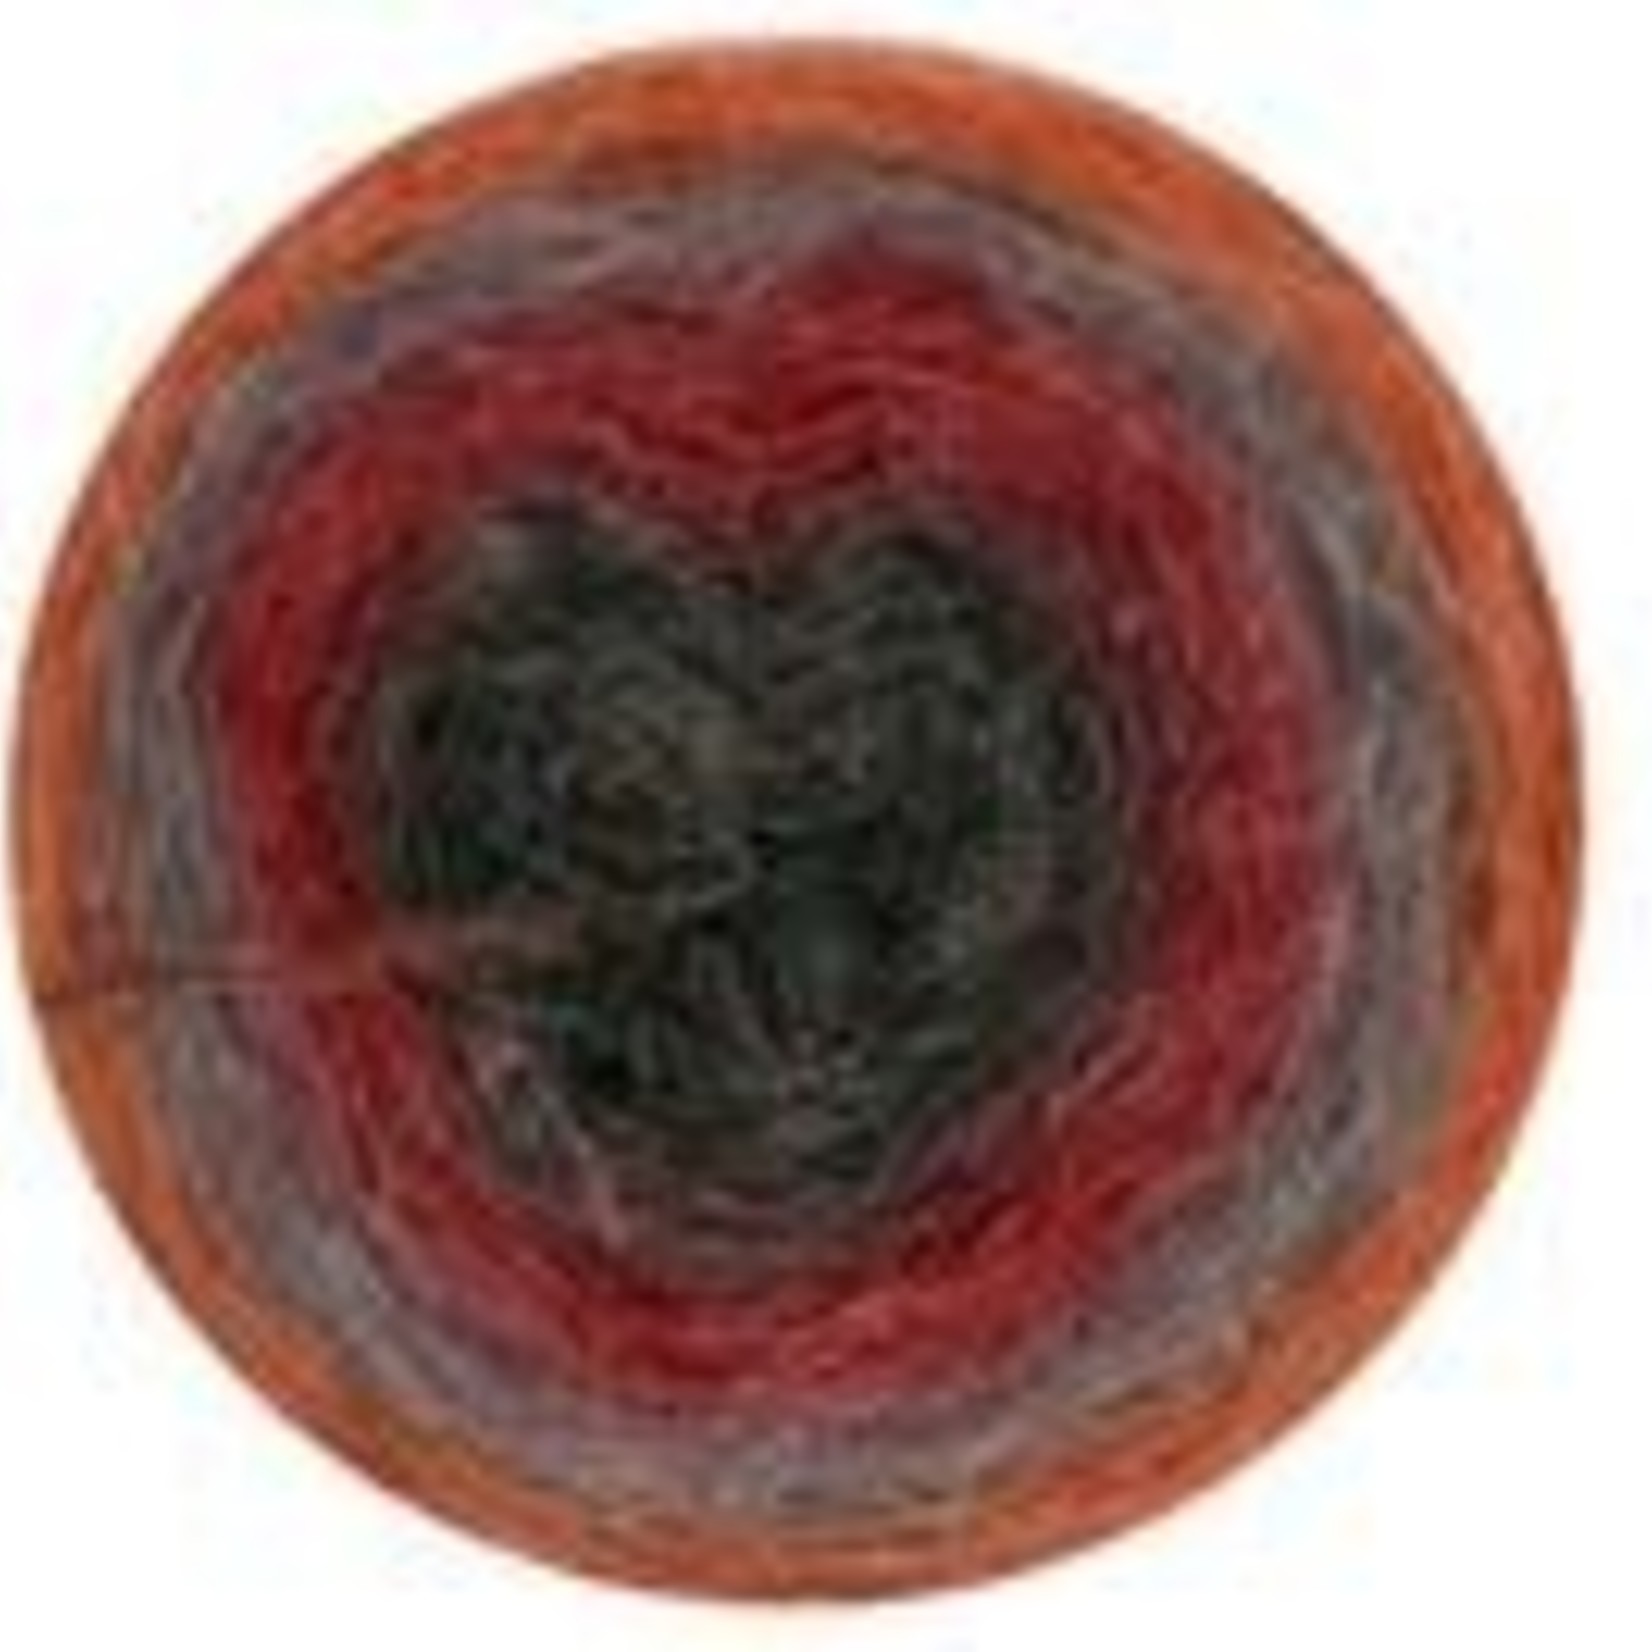 Universal Yarns Revolutions 200g - Bulky Weight 5 - 560m (612yds) by UNIVERSAL